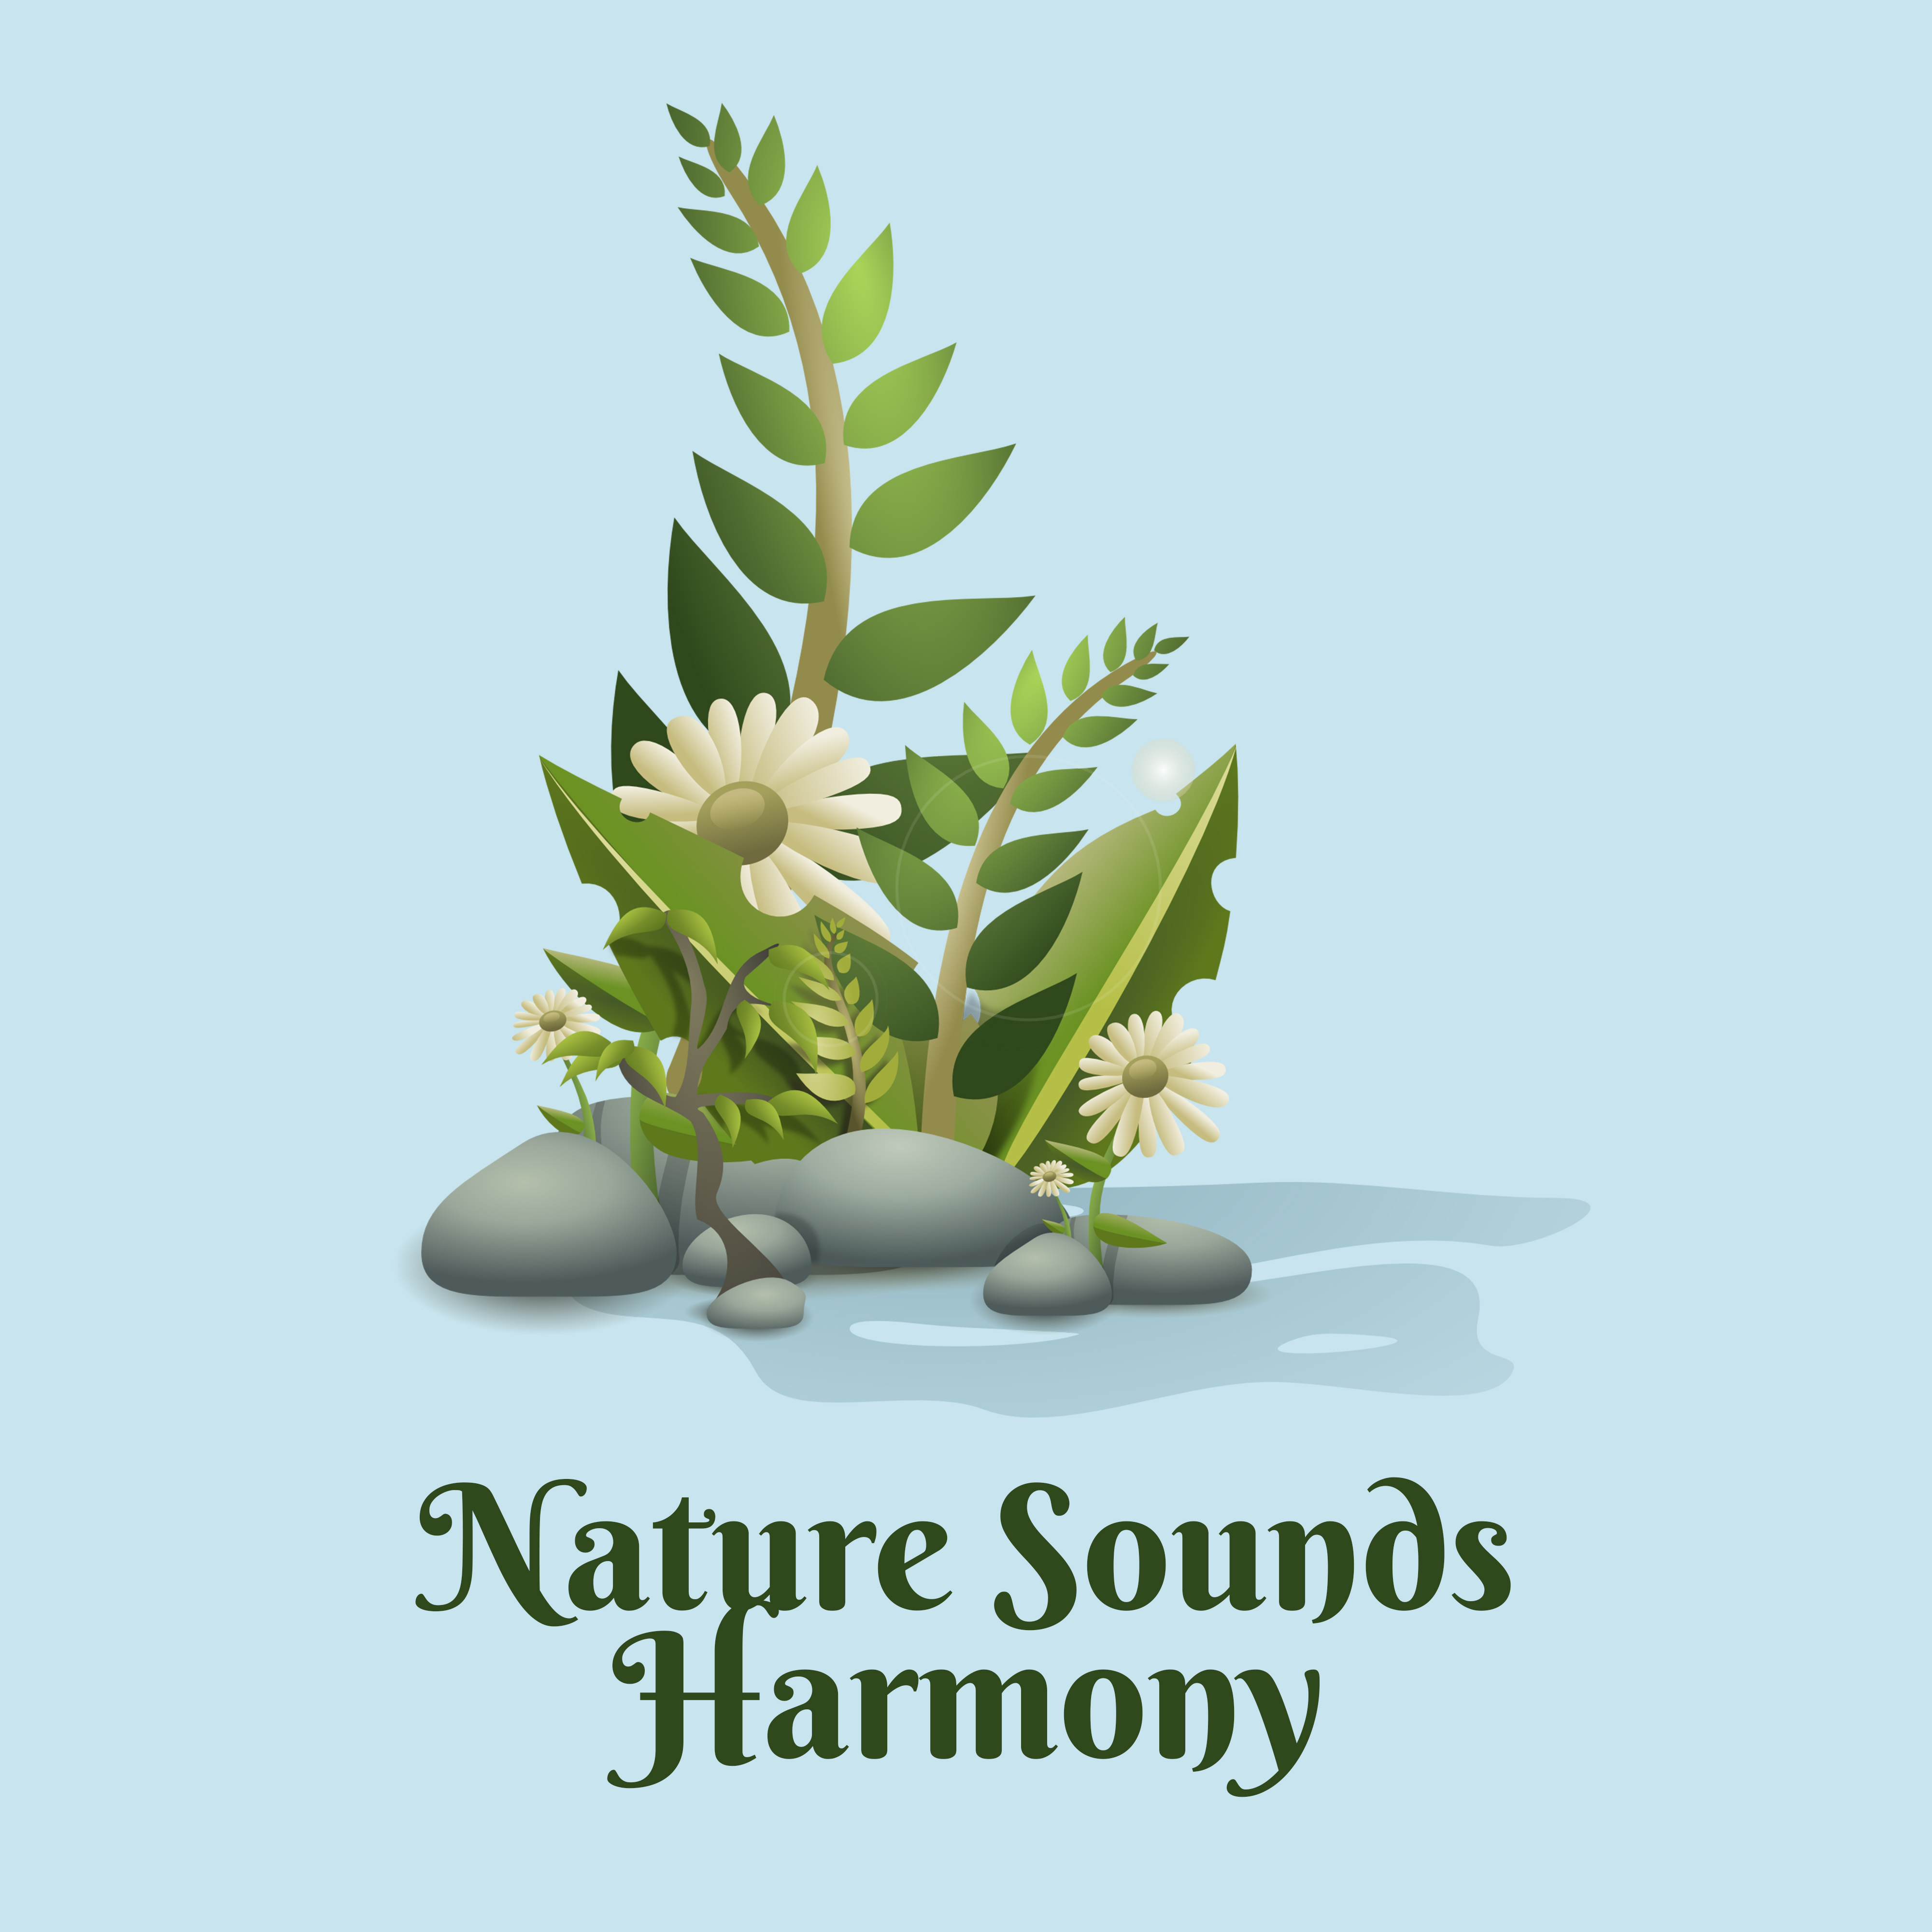 Nature Sounds Harmony  Relaxing Music, New Age 2017, Rest, Healing Bliss, Zen